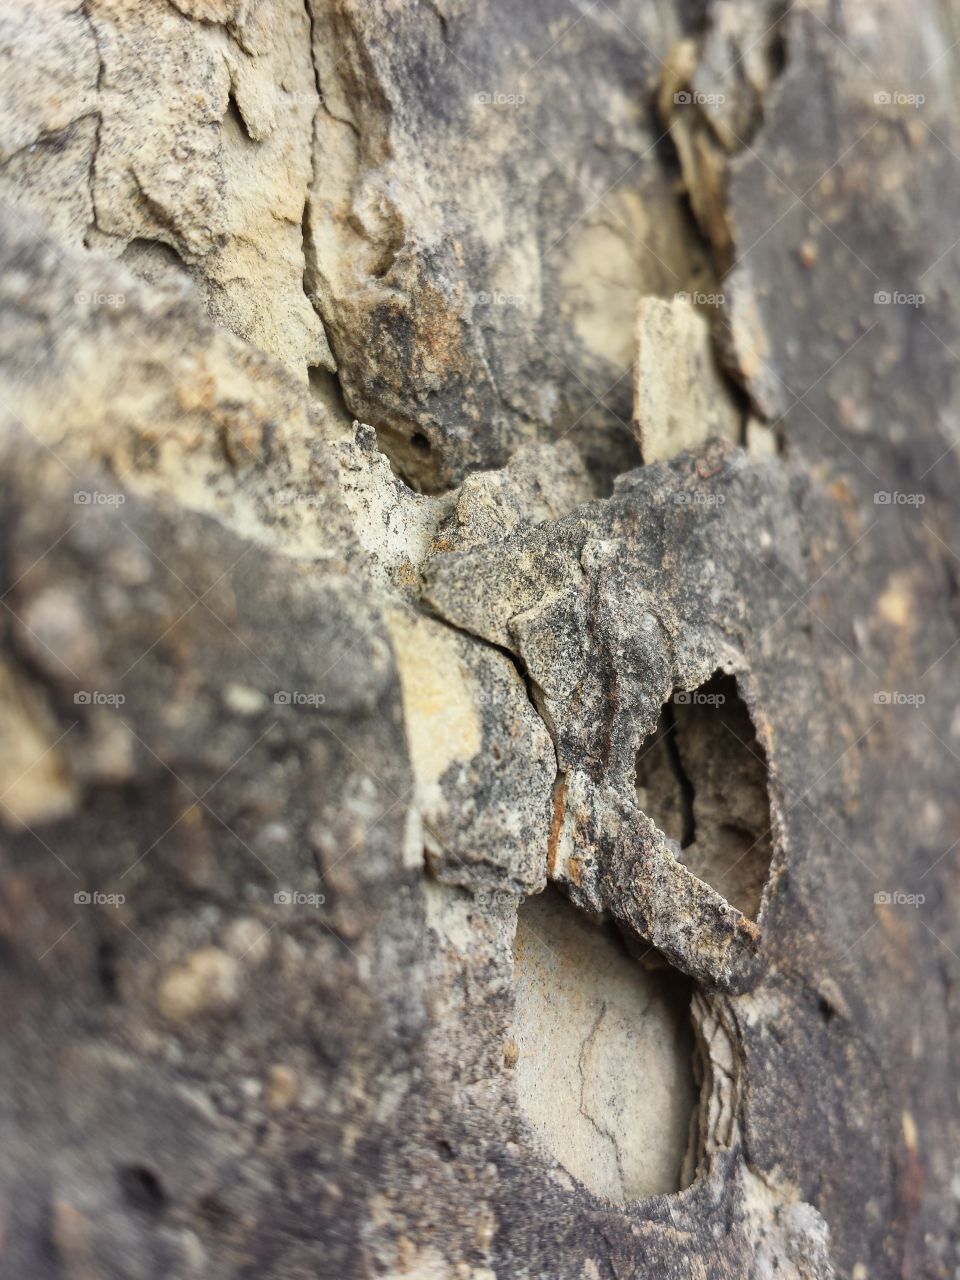 Full frame of dry and cracked tree trunk